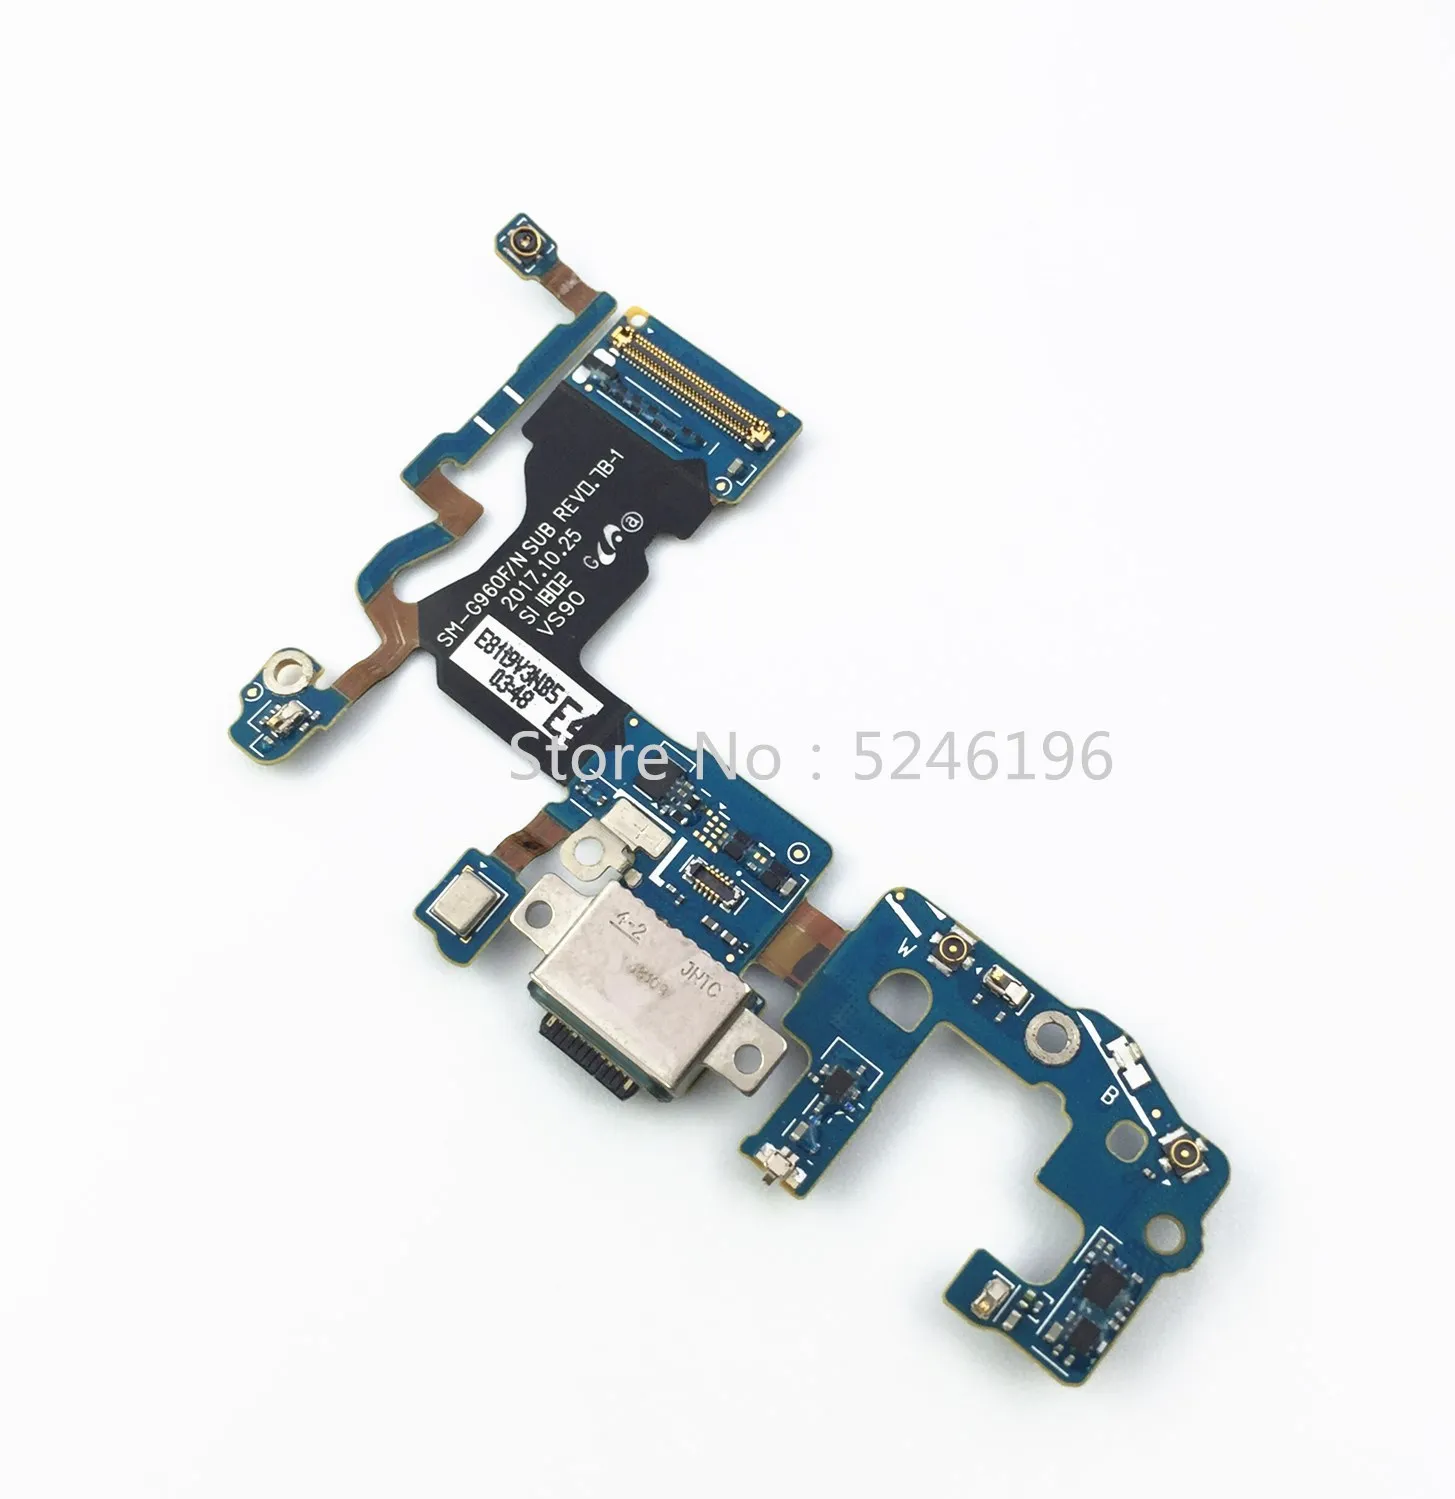 

1pcs Micro USB PCB Charging Charger Dock Port mini Connector Flex Cable For Samsung Galaxy S9 G960F S9 Plus G965F Circuit board